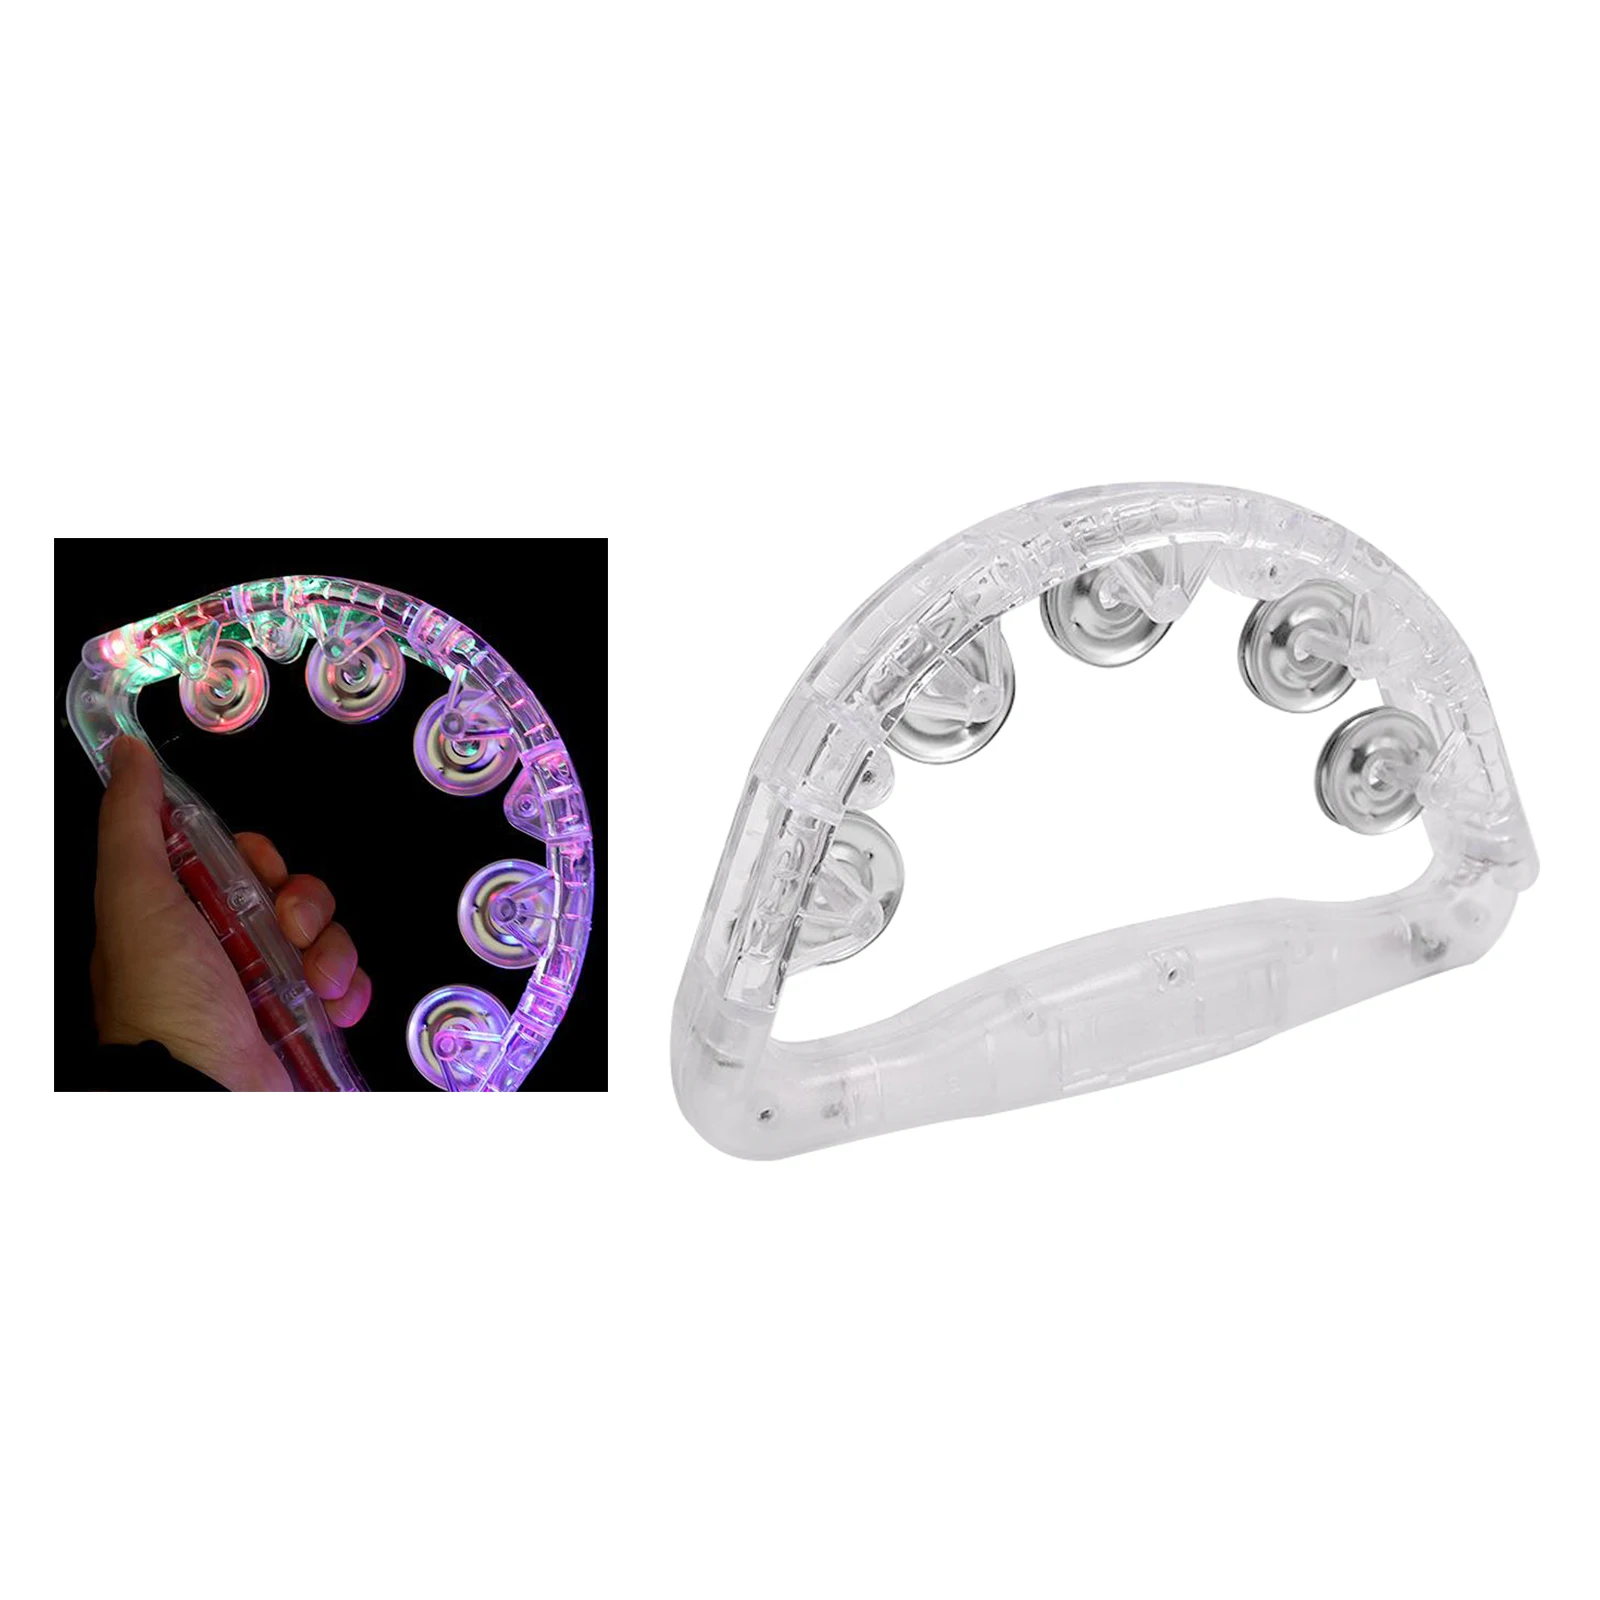 Light up Tambourine 2PCS LED Musical Flashing Tambourine Hand Percussion Instrument For Babies 